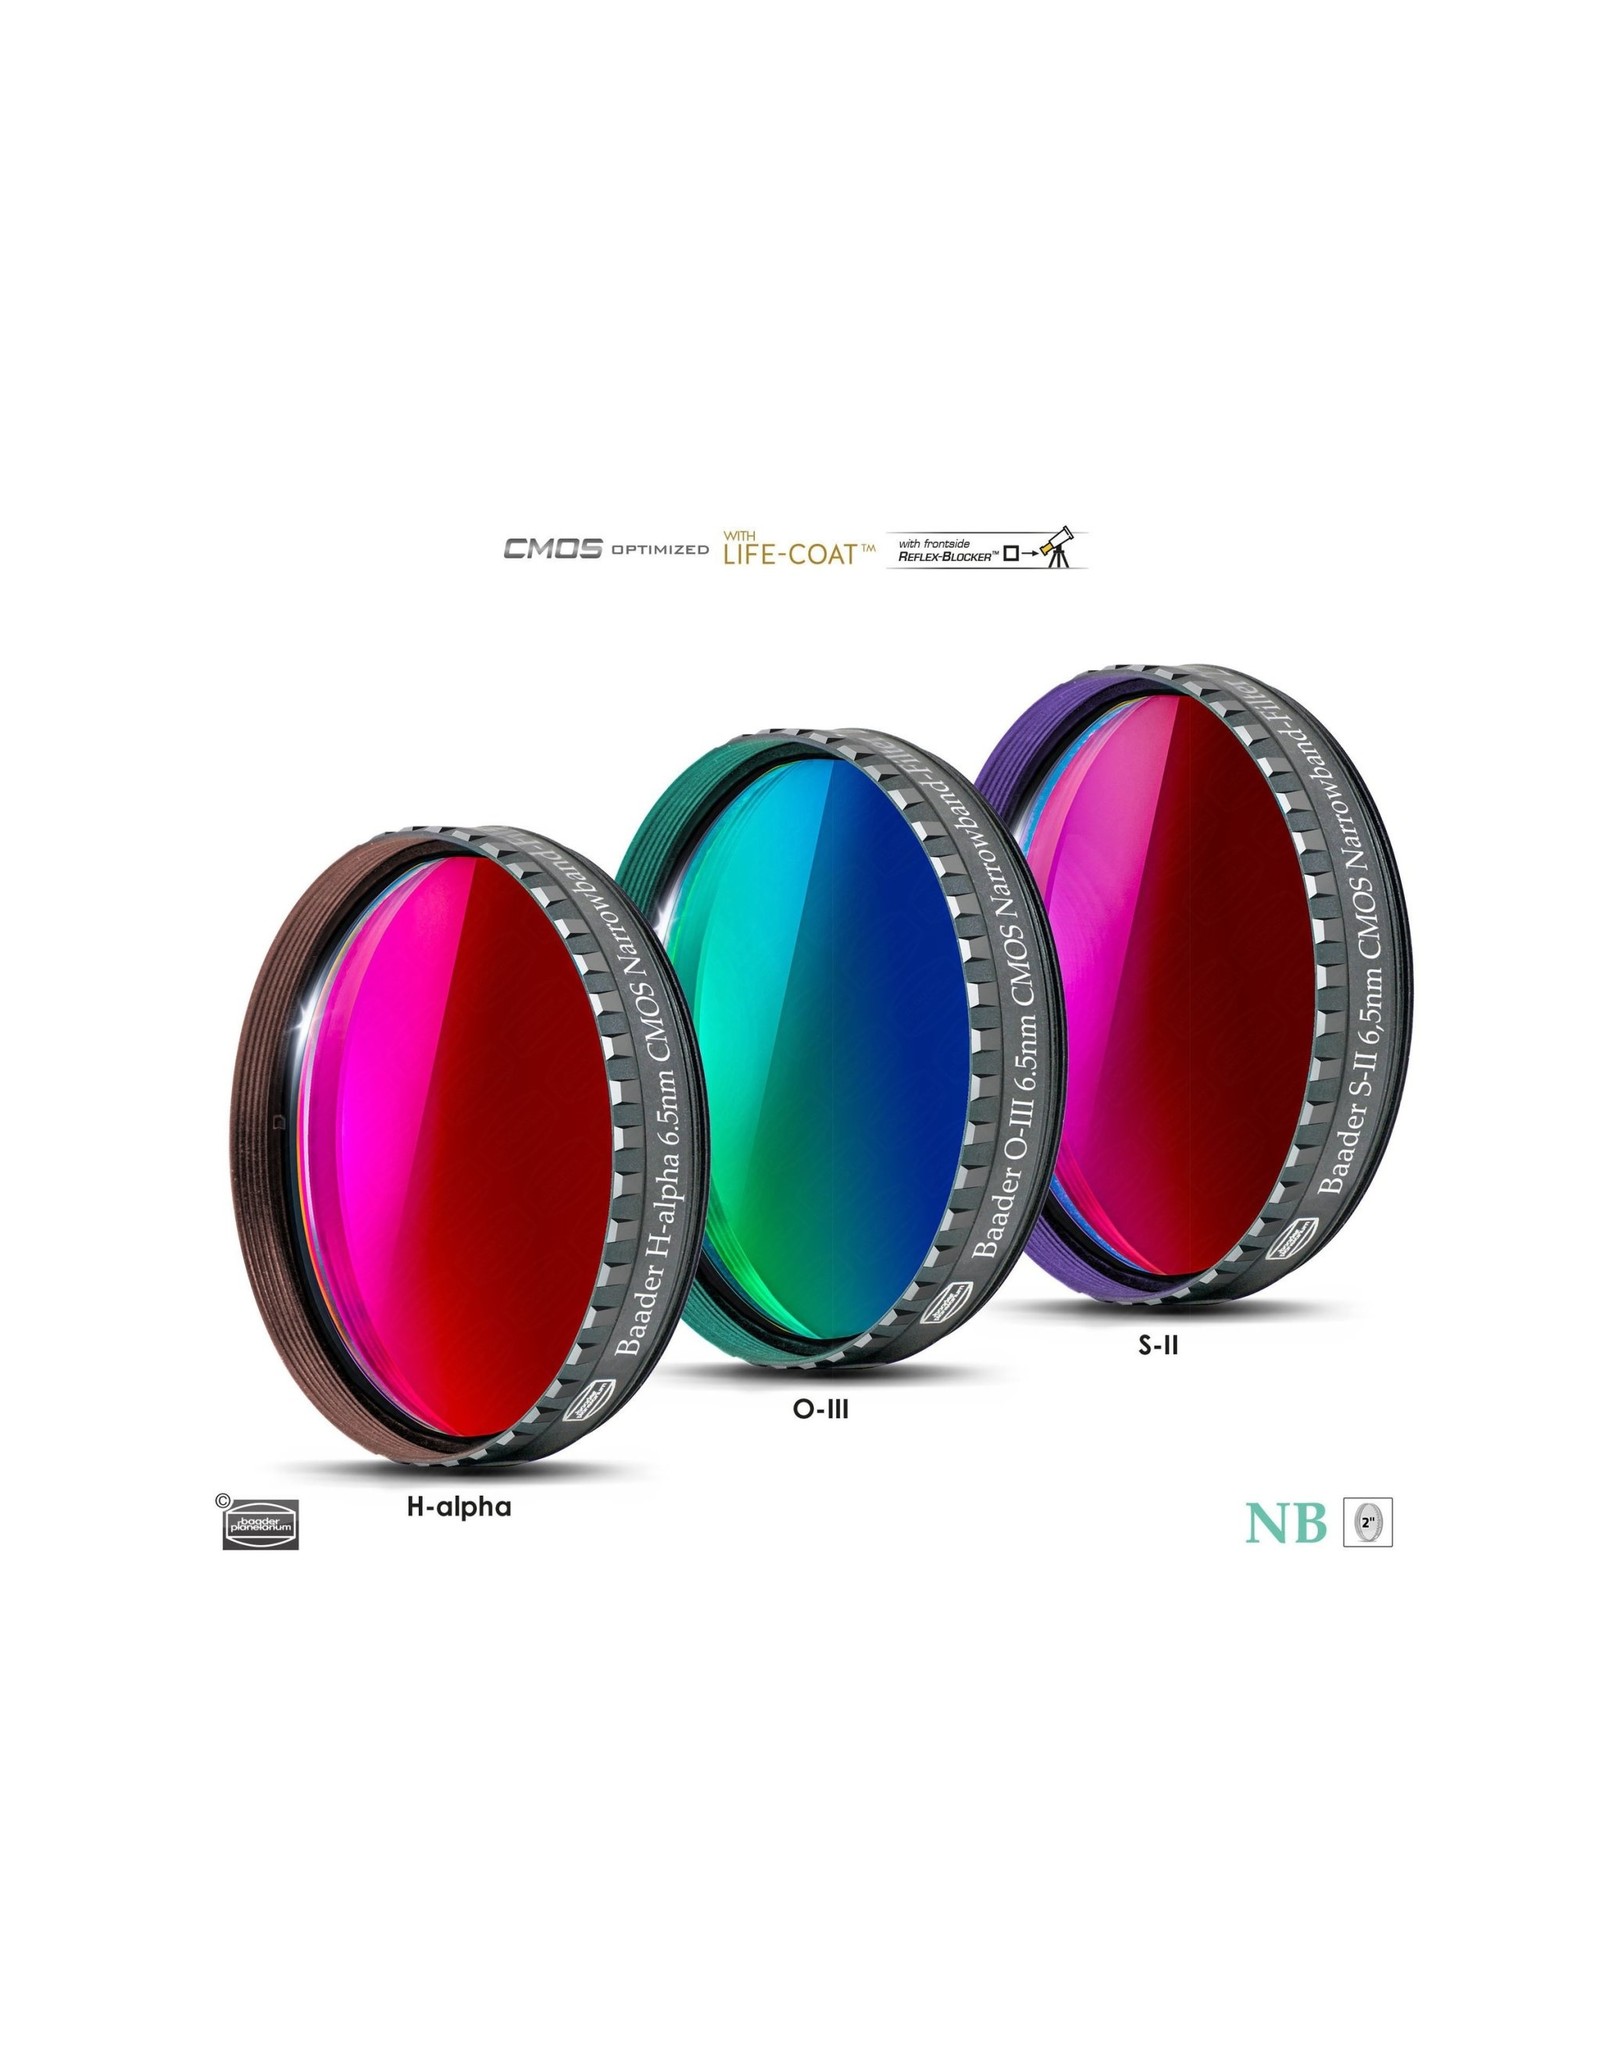 Baader Planetarium Baader 6.5nm Narrowband Oxygen-III Filters – CMOS-optimized (Specify Size)